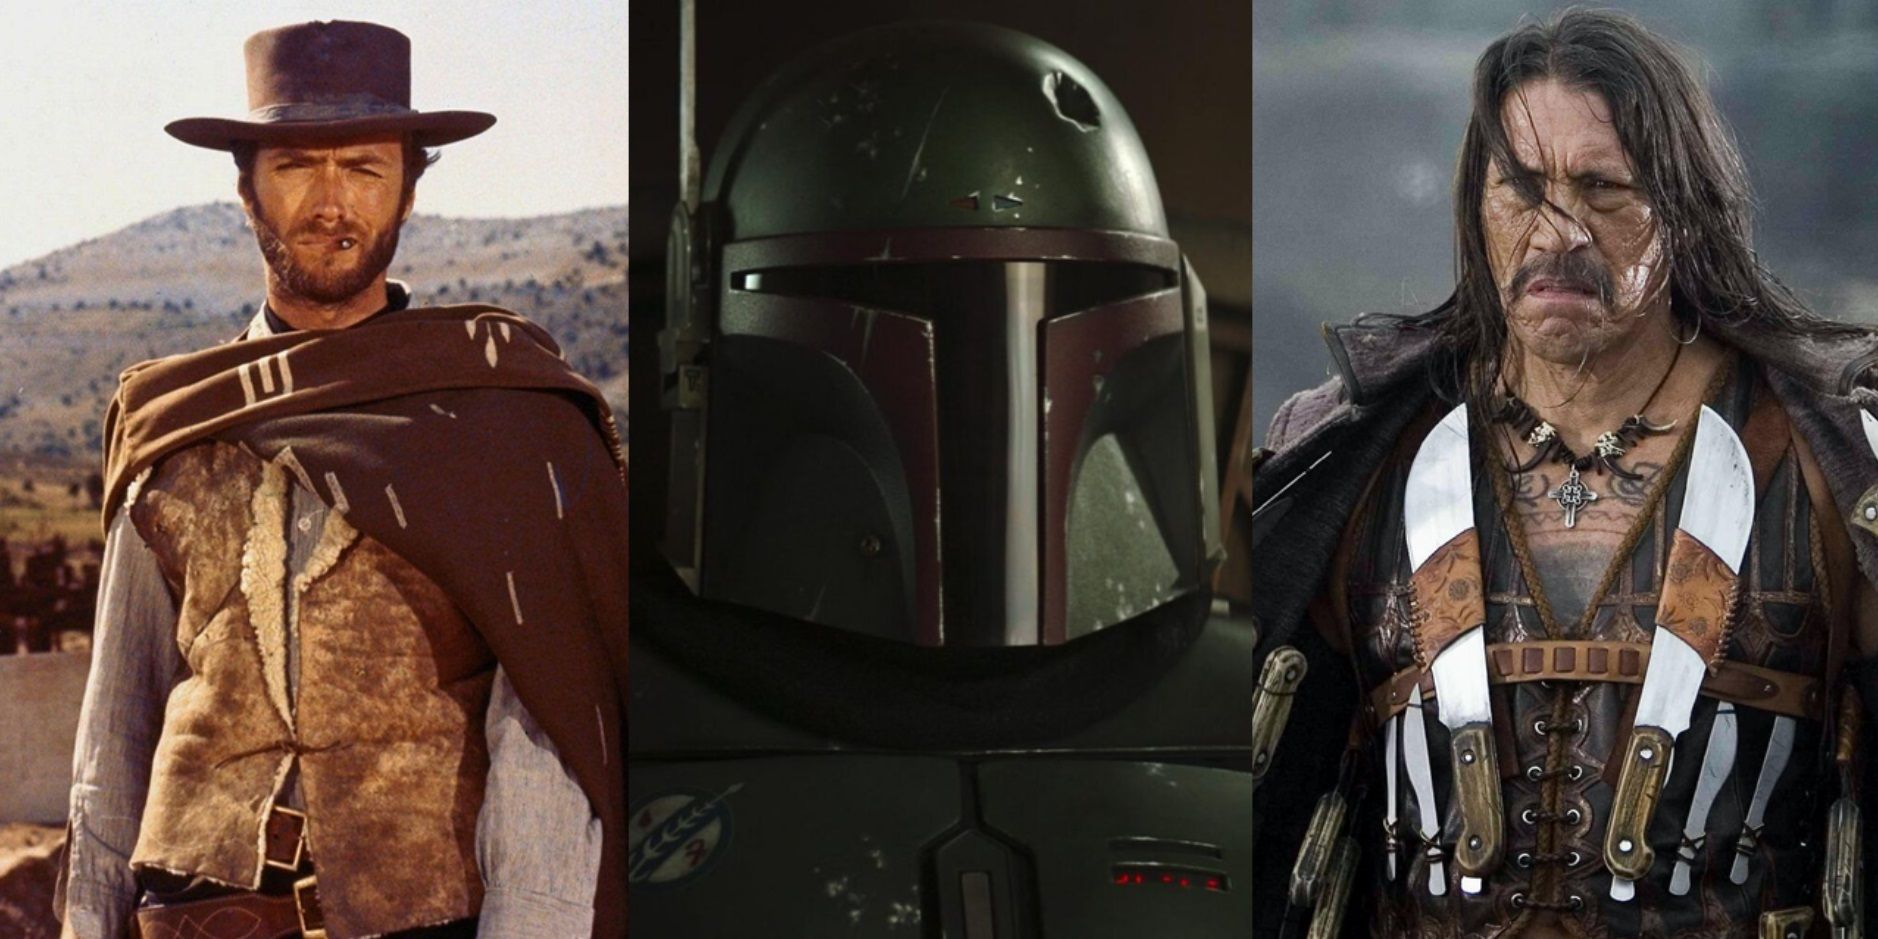 The Book Of Boba Fett 10 Movies To Watch To Get Excited For The Star Wars Series